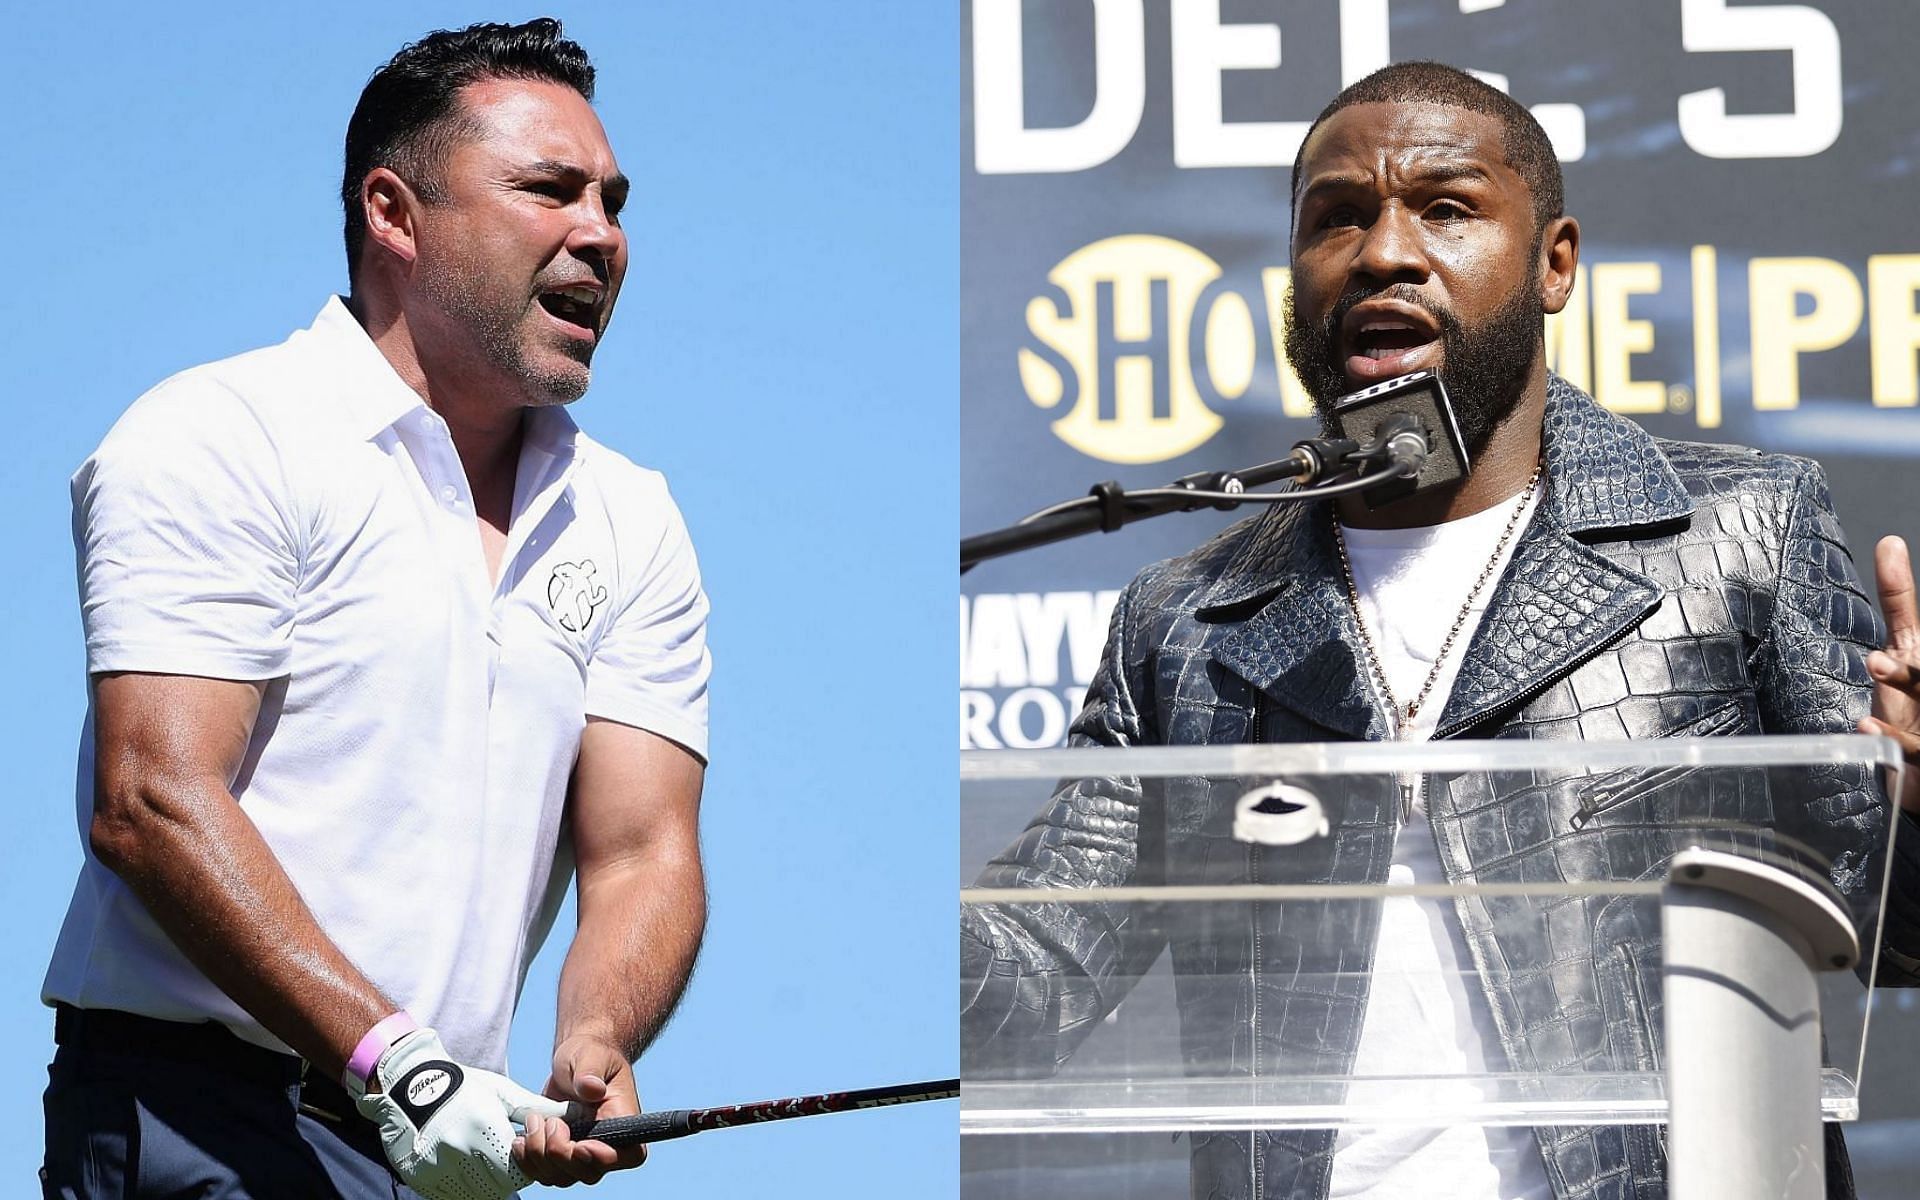 Oscar De La Hoya has revealed that he would be interested in boxing Floyd Mayweather once again